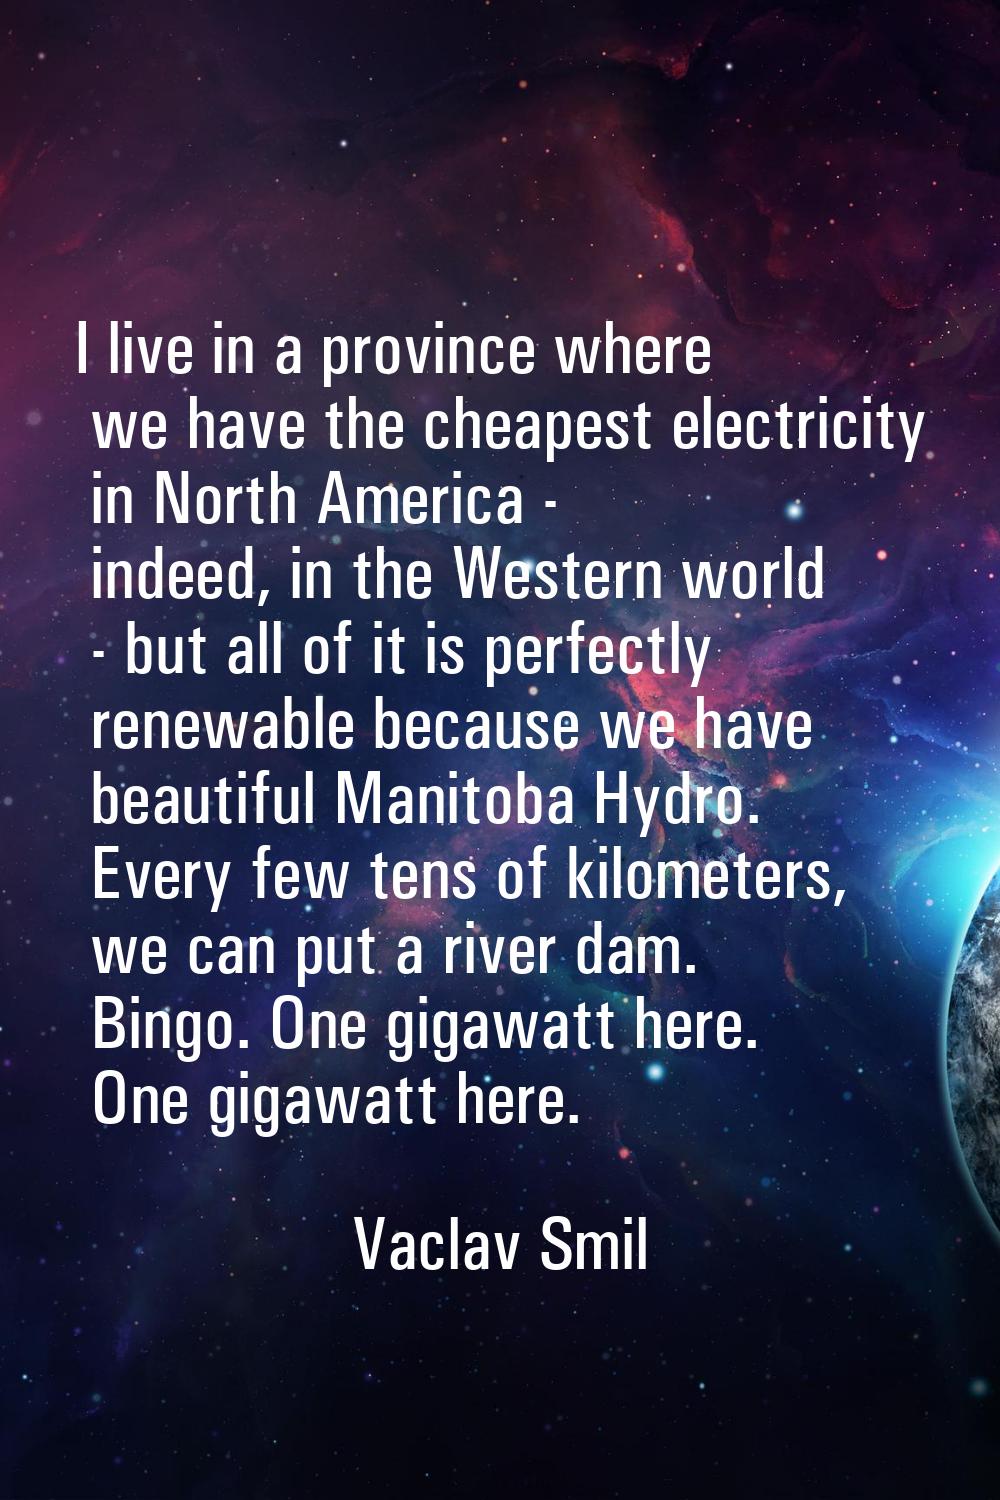 I live in a province where we have the cheapest electricity in North America - indeed, in the Weste